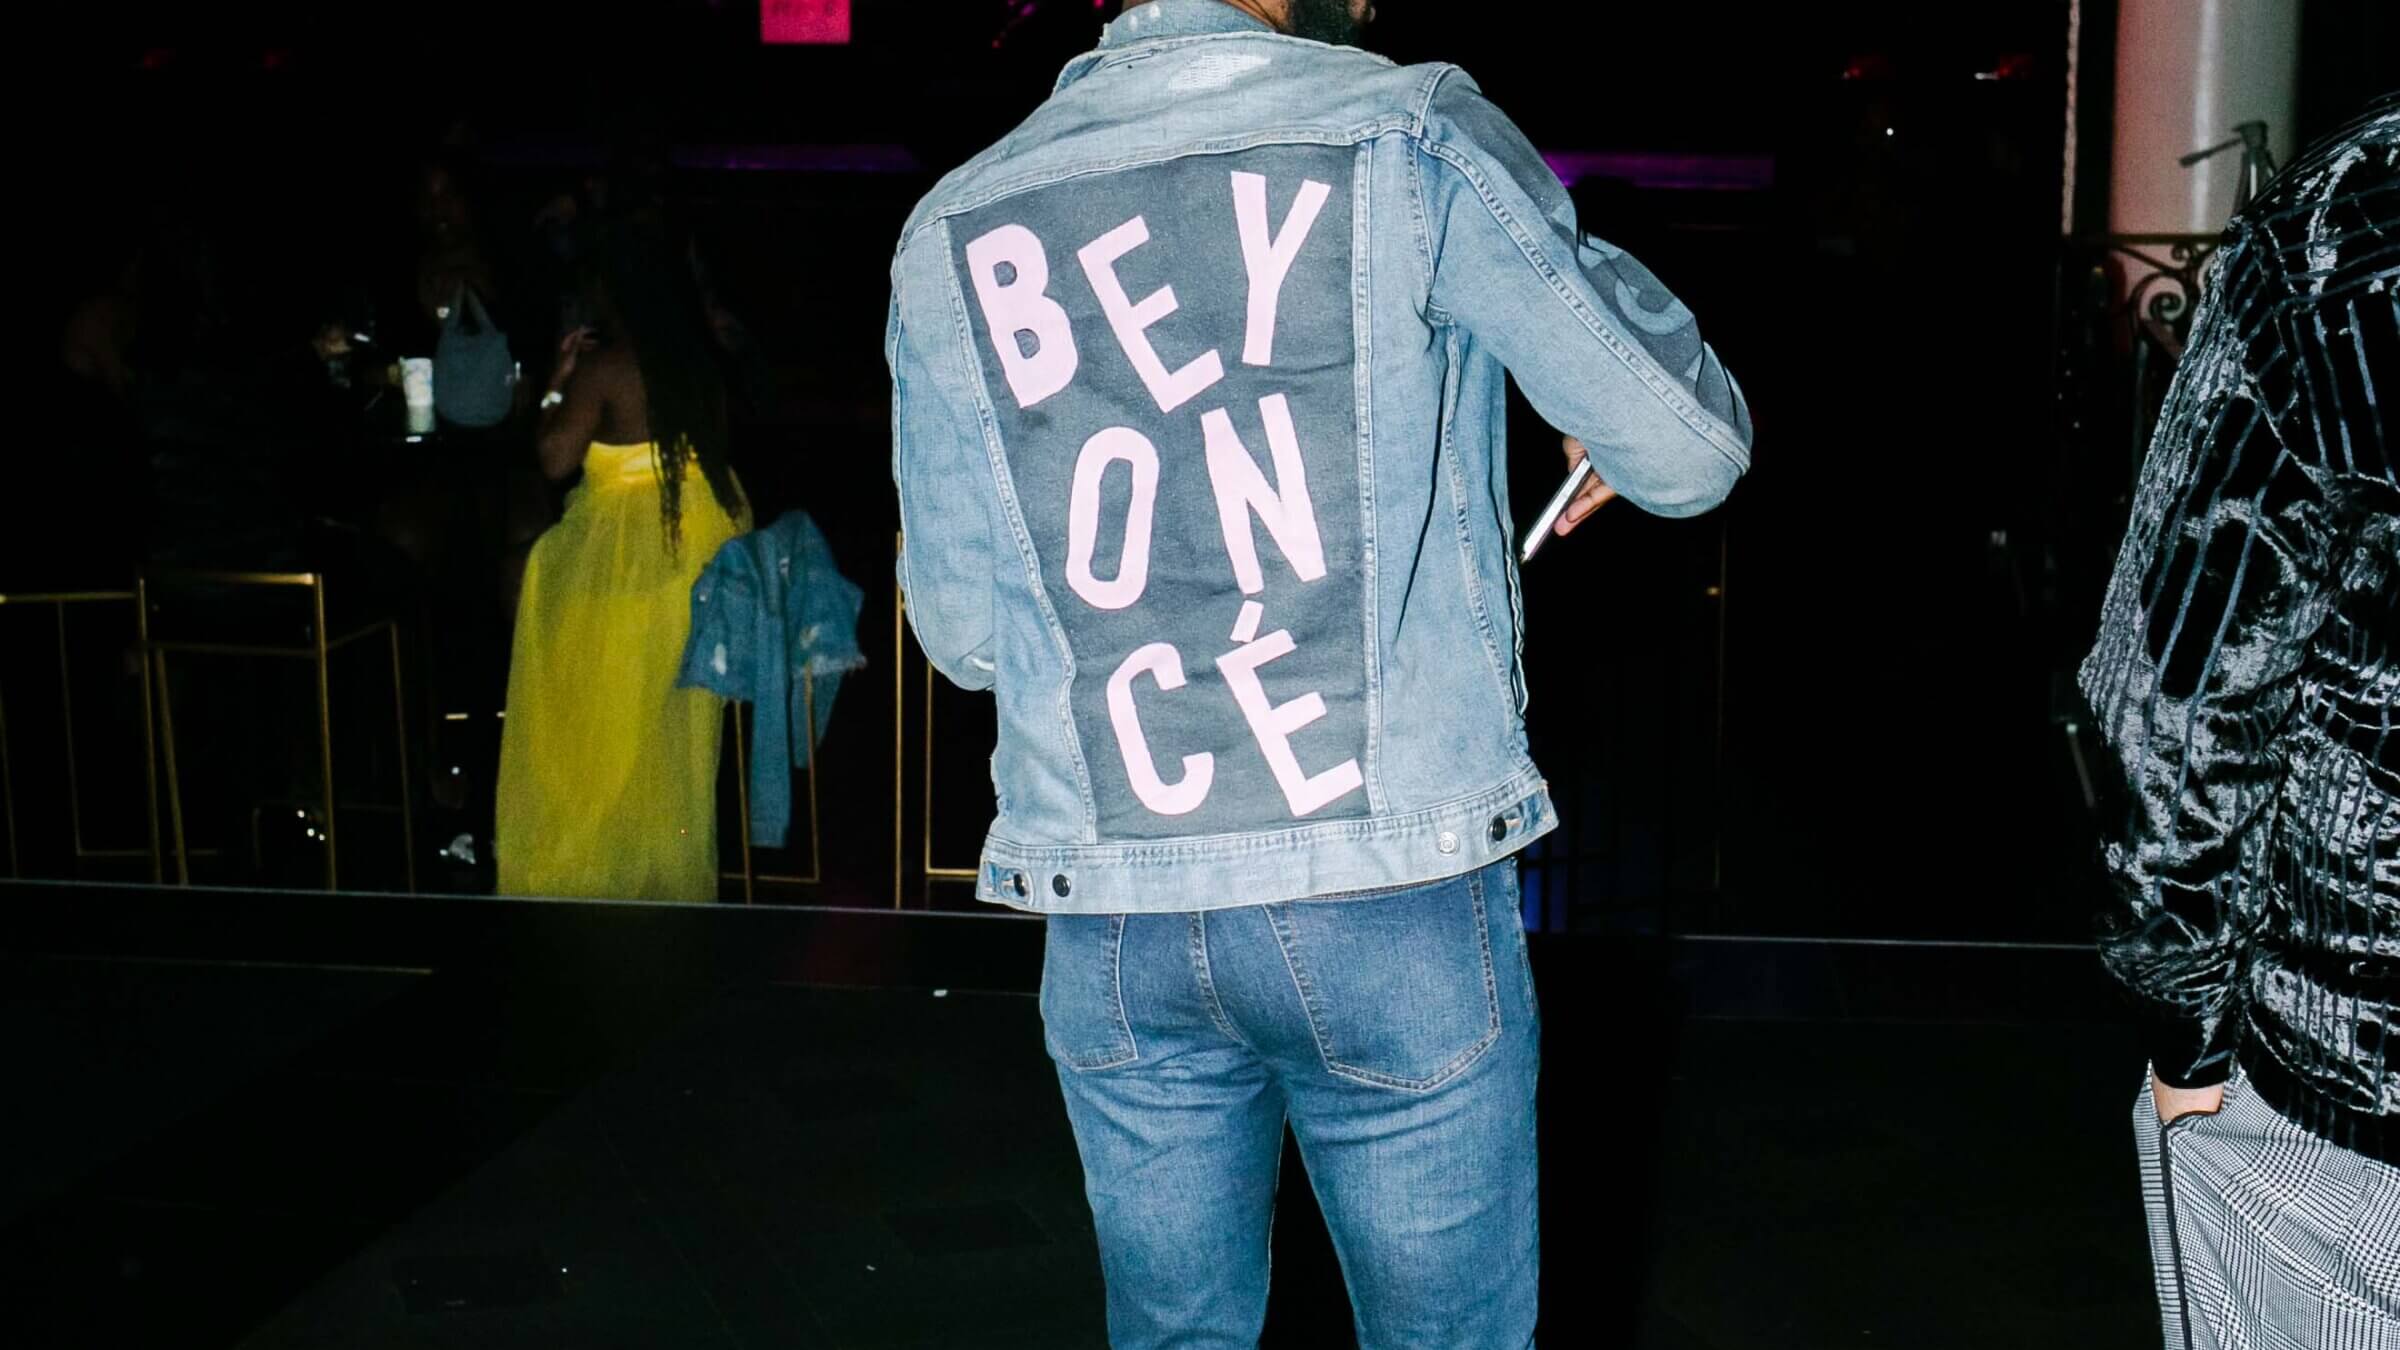 A member of the Bey Hive wears a denim jacket with Beyoncé's name.